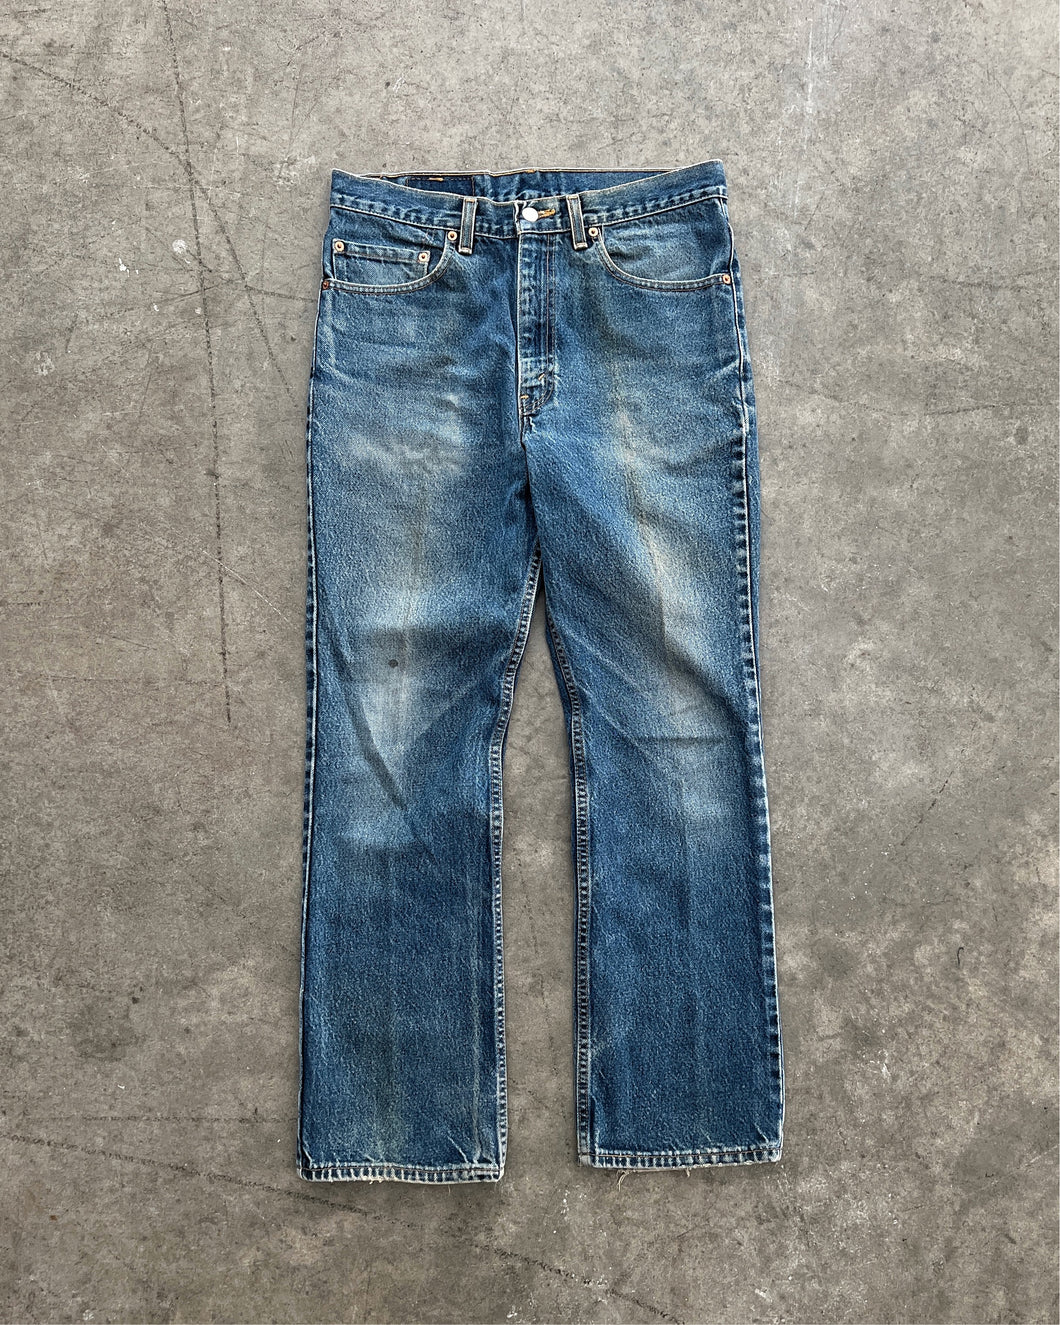 LEVI’S 517 BOOT CUT FADED BLUE JEANS - 1990S